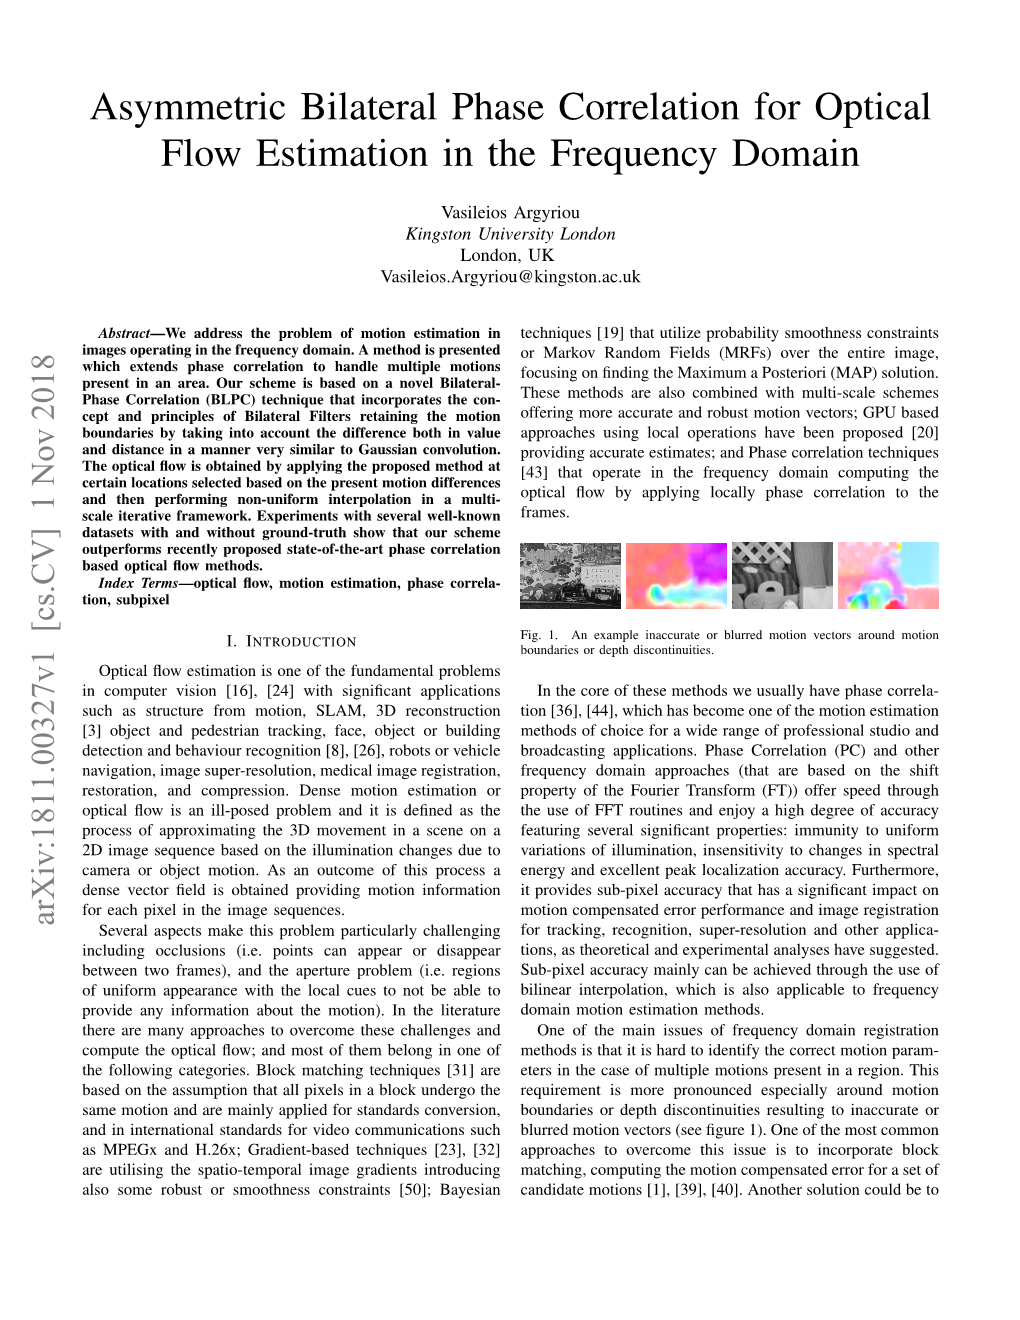 Asymmetric Bilateral Phase Correlation for Optical Flow Estimation in the Frequency Domain